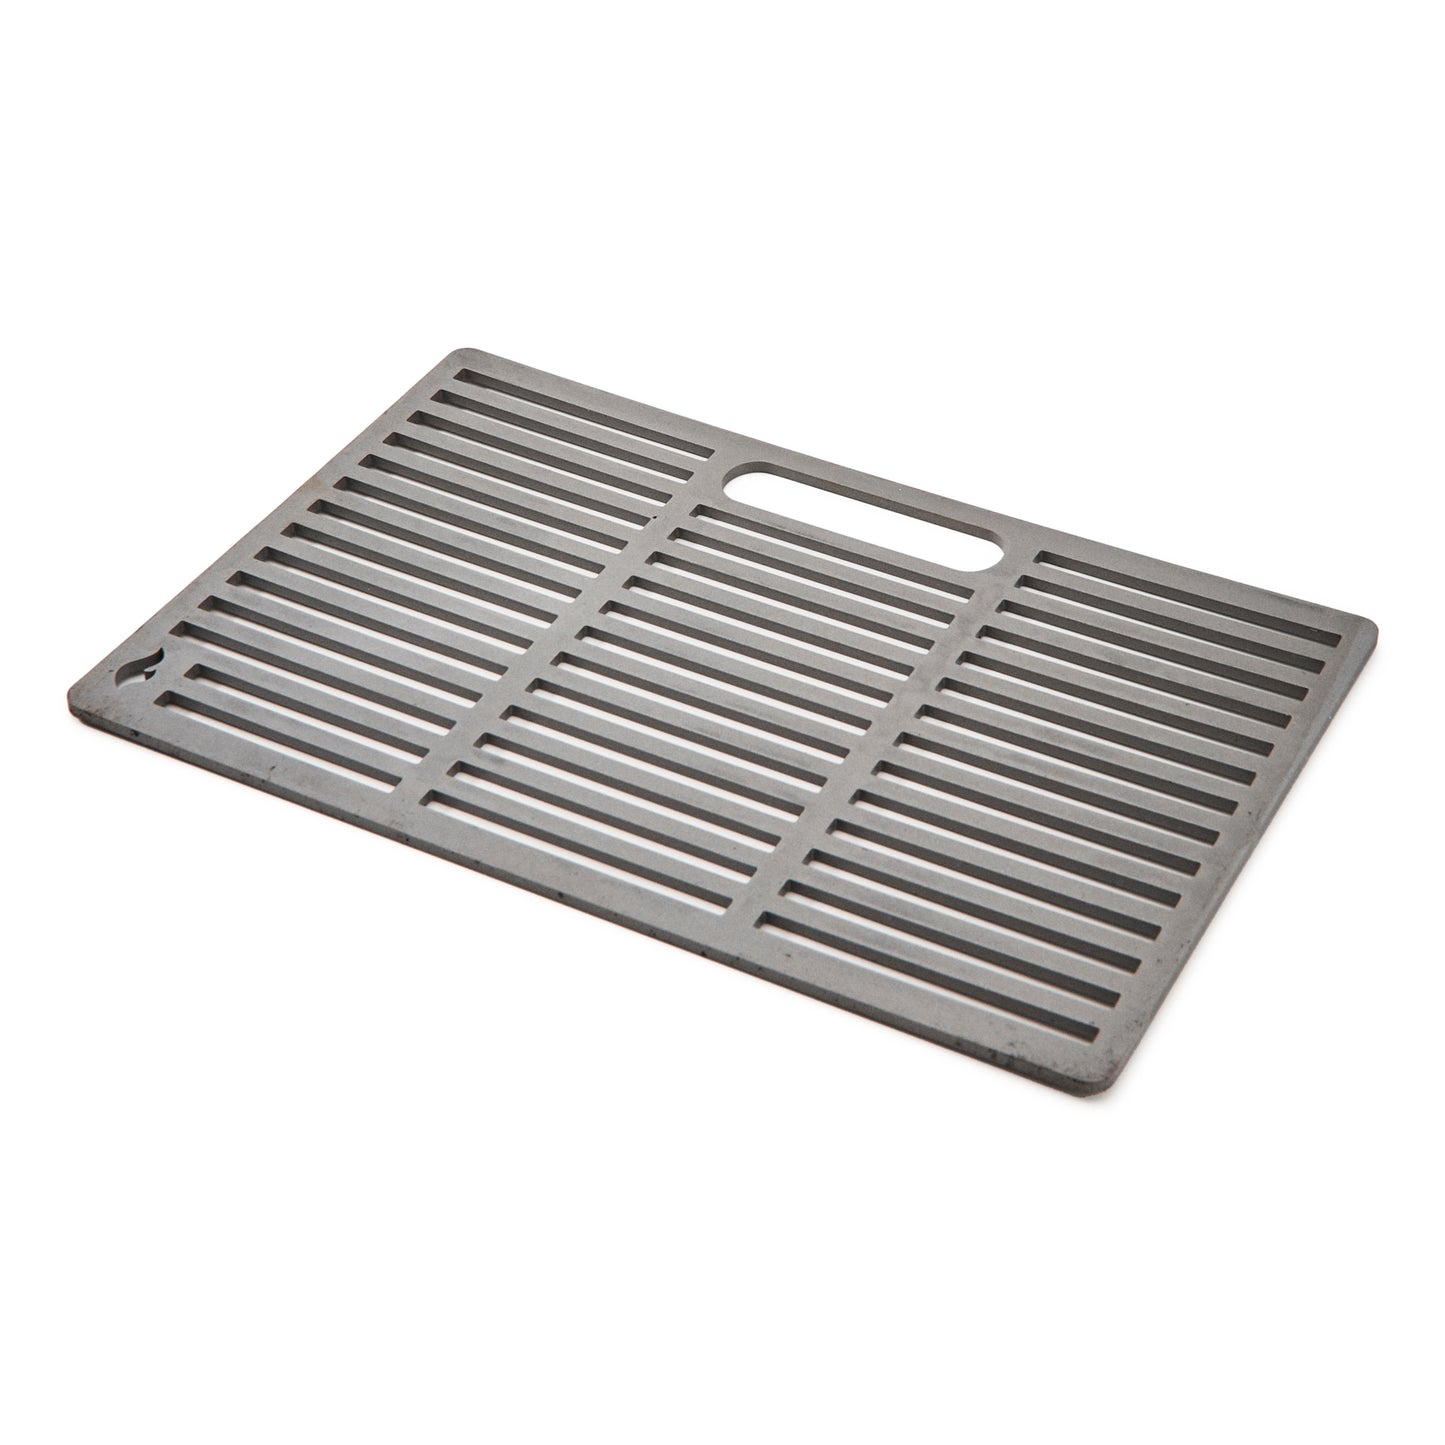 Cook Stand & Grill Grate